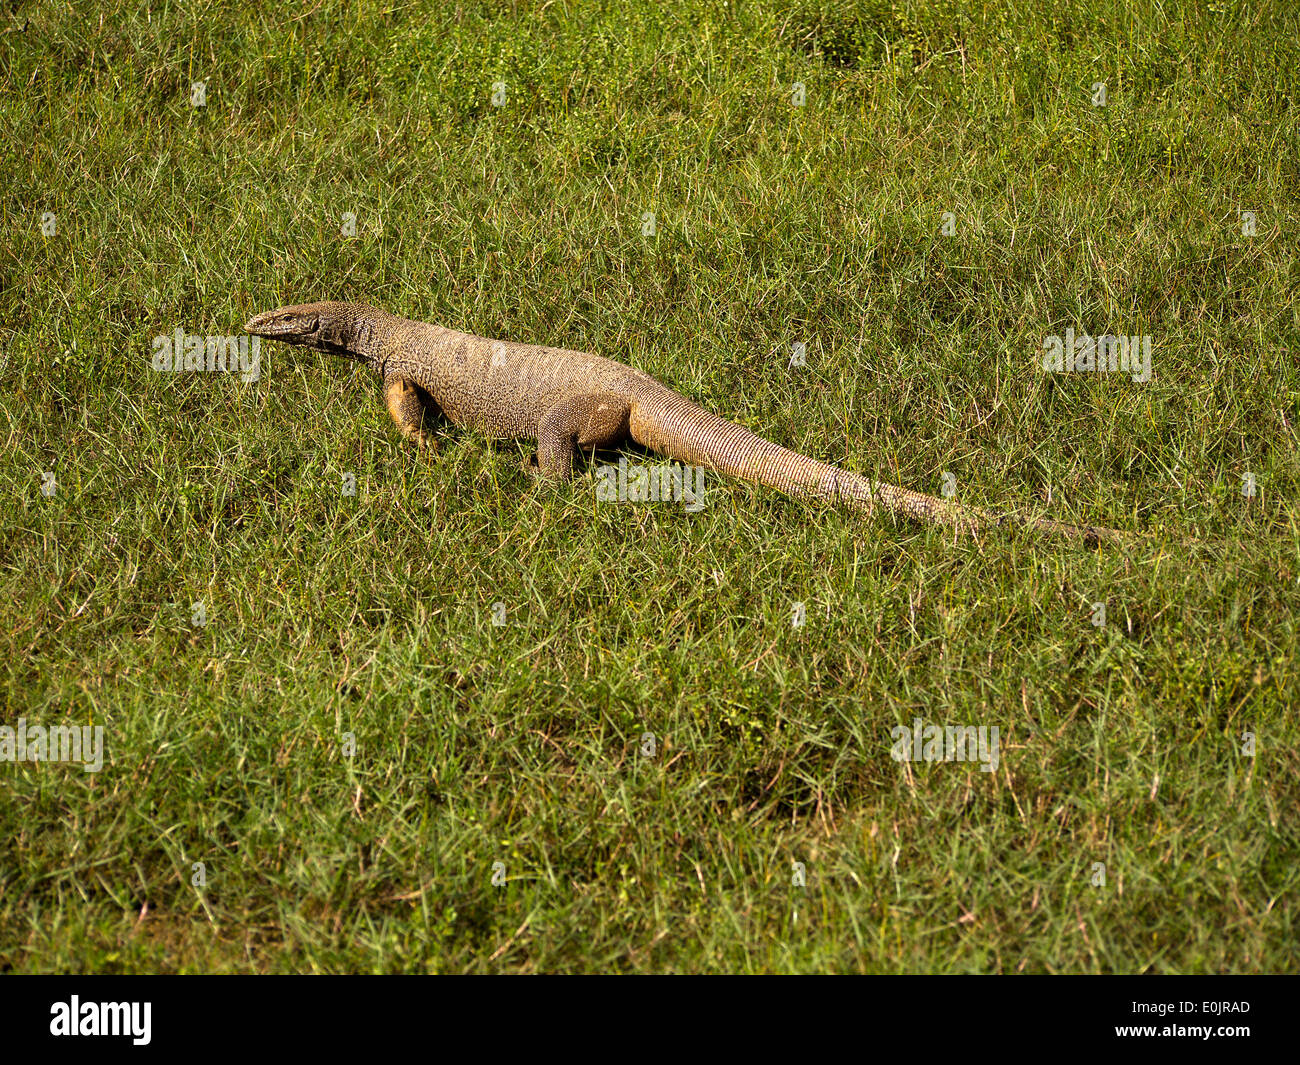 Animal Varan Reptile High Resolution Stock Photography and Images - Alamy